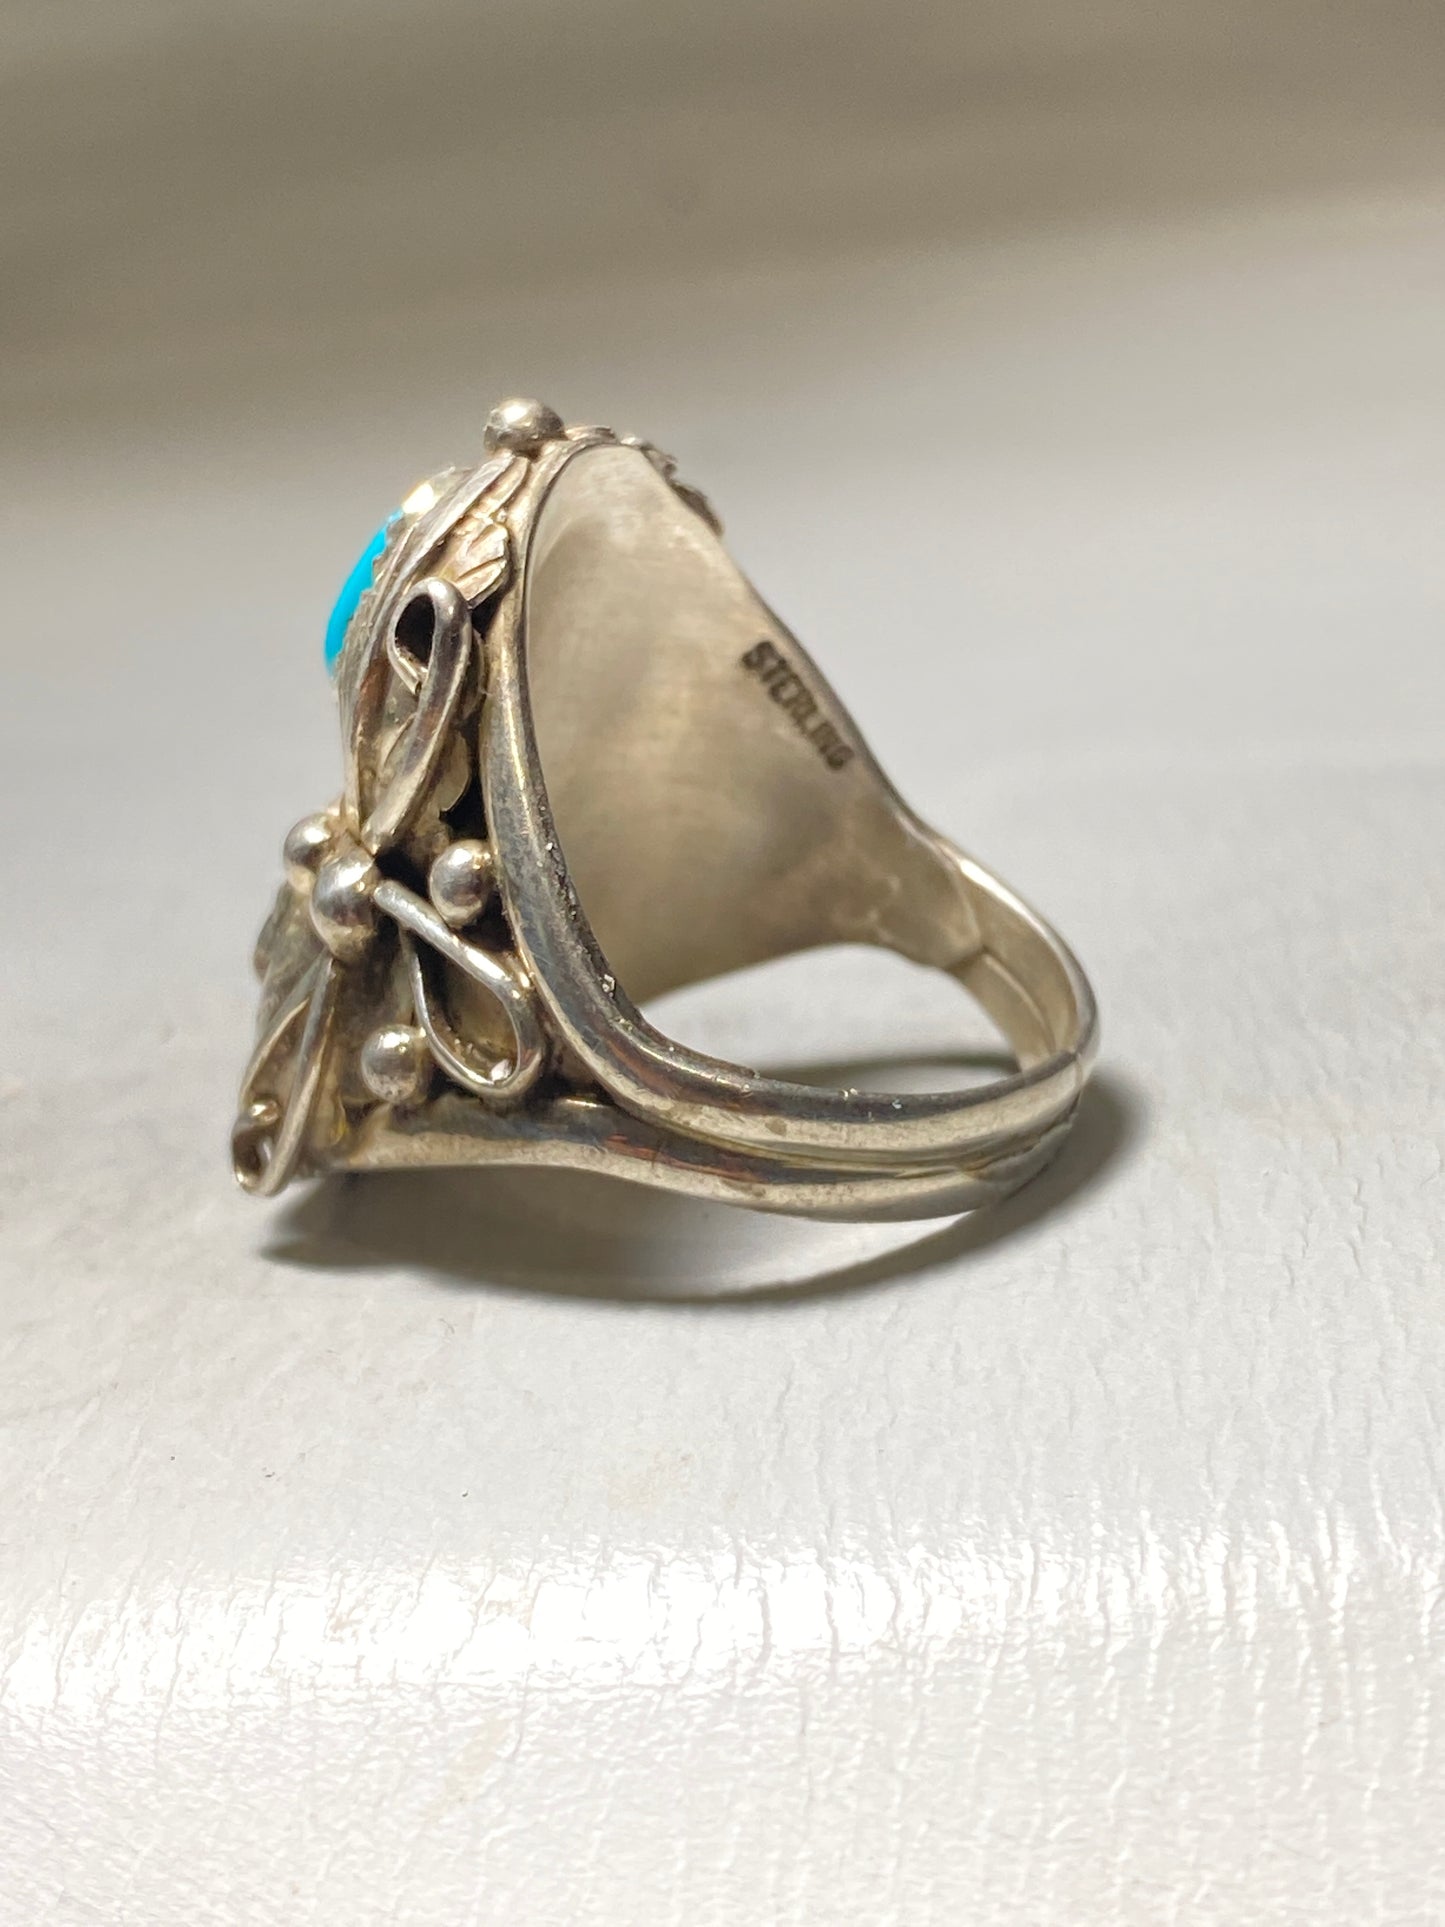 Turquoise ring coral Navajo southwest sterling silver women men